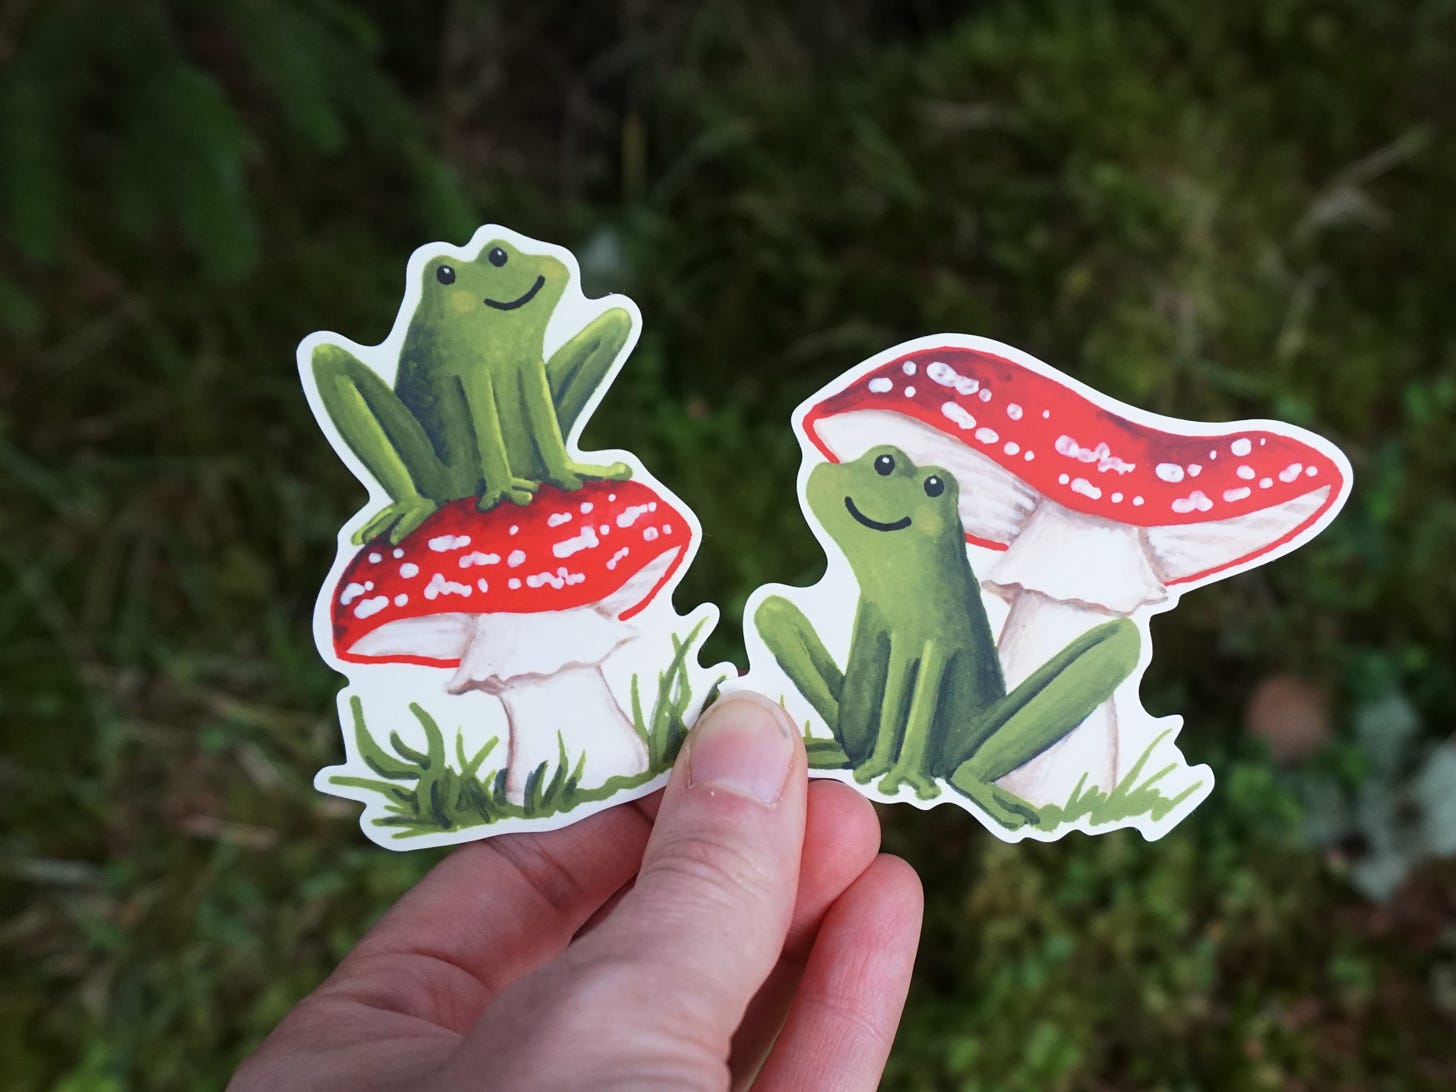 Image description: two shaped stickers of frogs, one sitting atop a red and white fly agaric mushroom, and the other sitting beneath one.